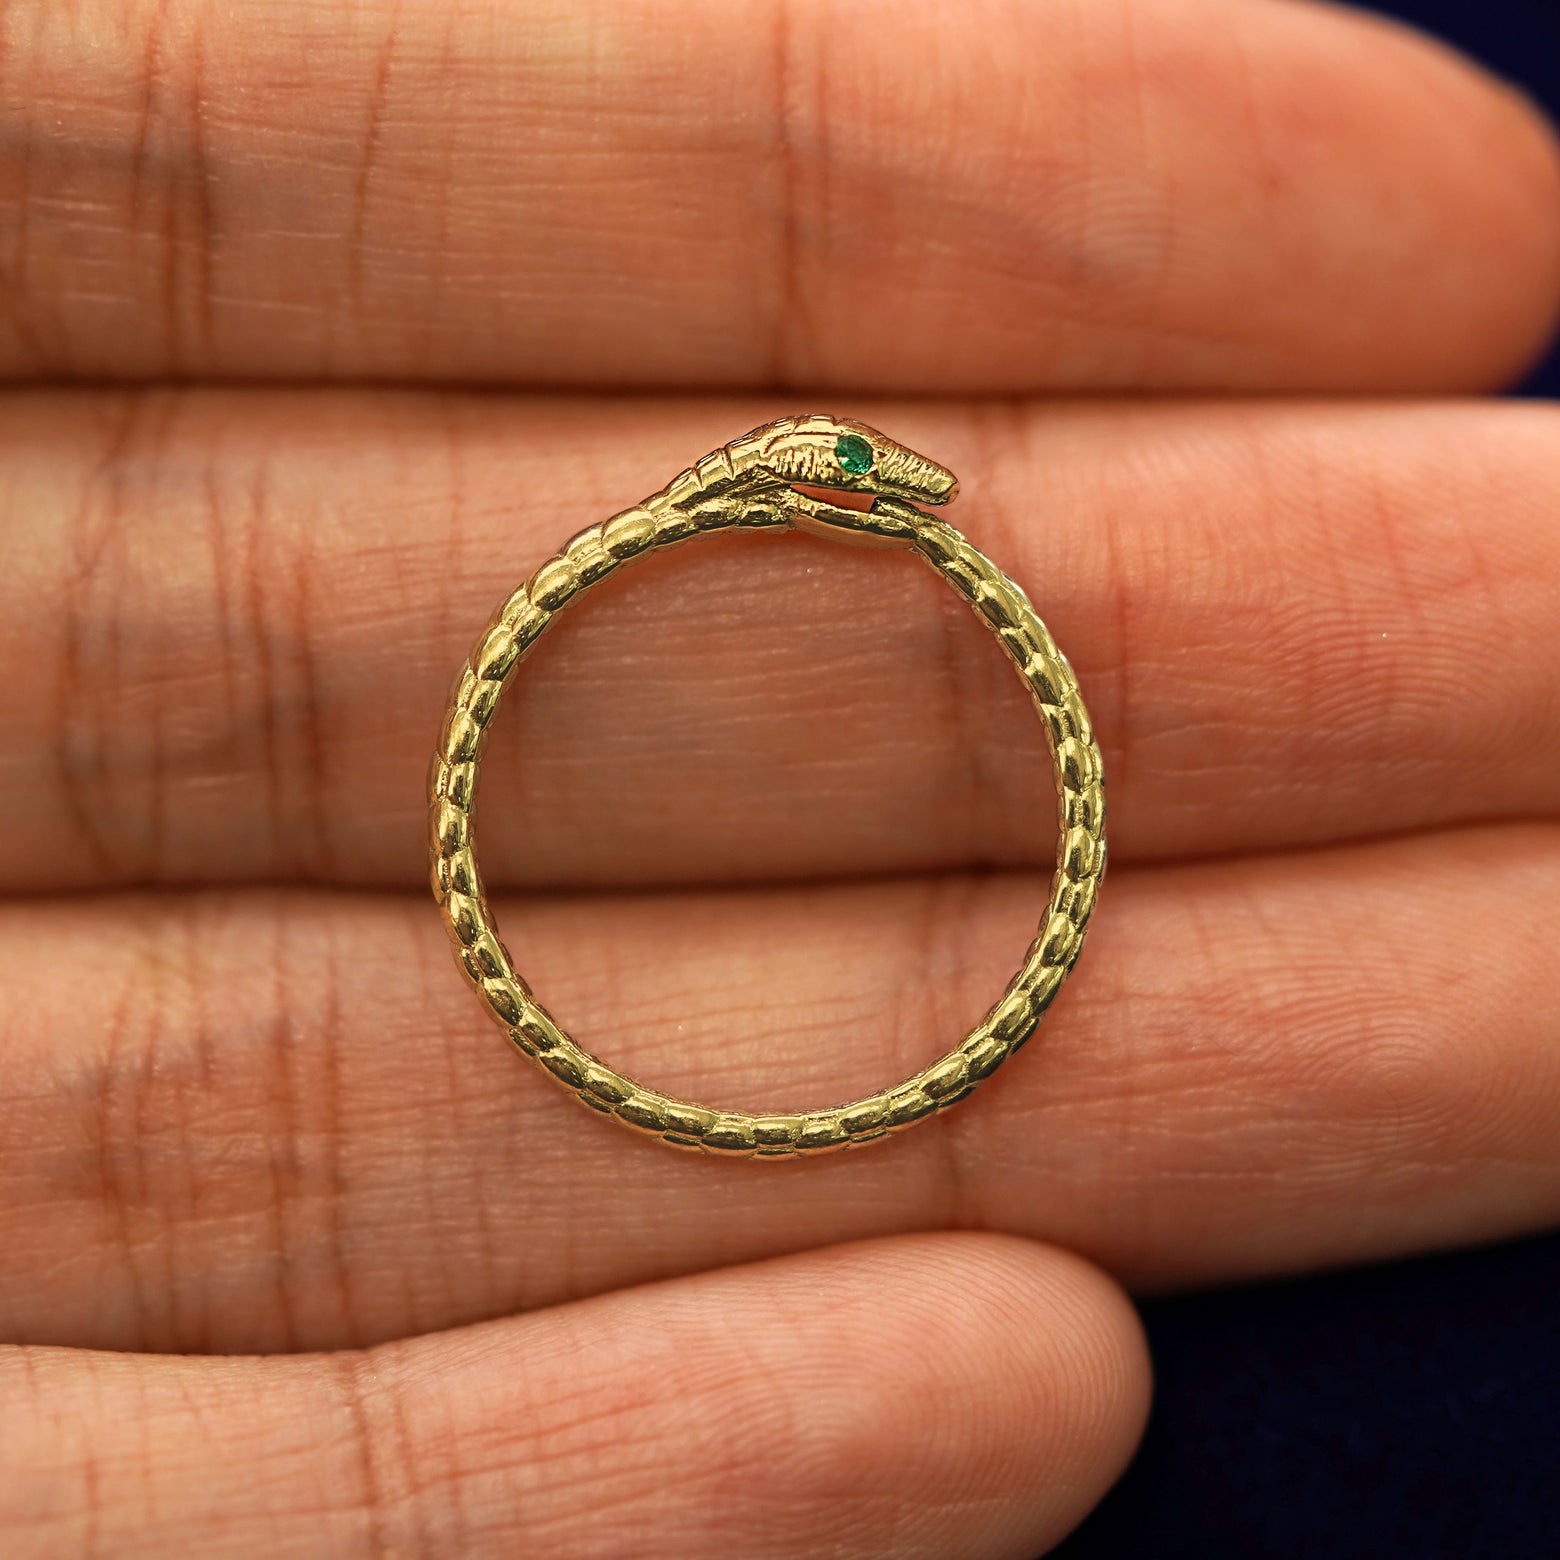 A yellow gold emerald Gemstone Ouroboros Snake RIng in a model's hand showing the thickness of the band